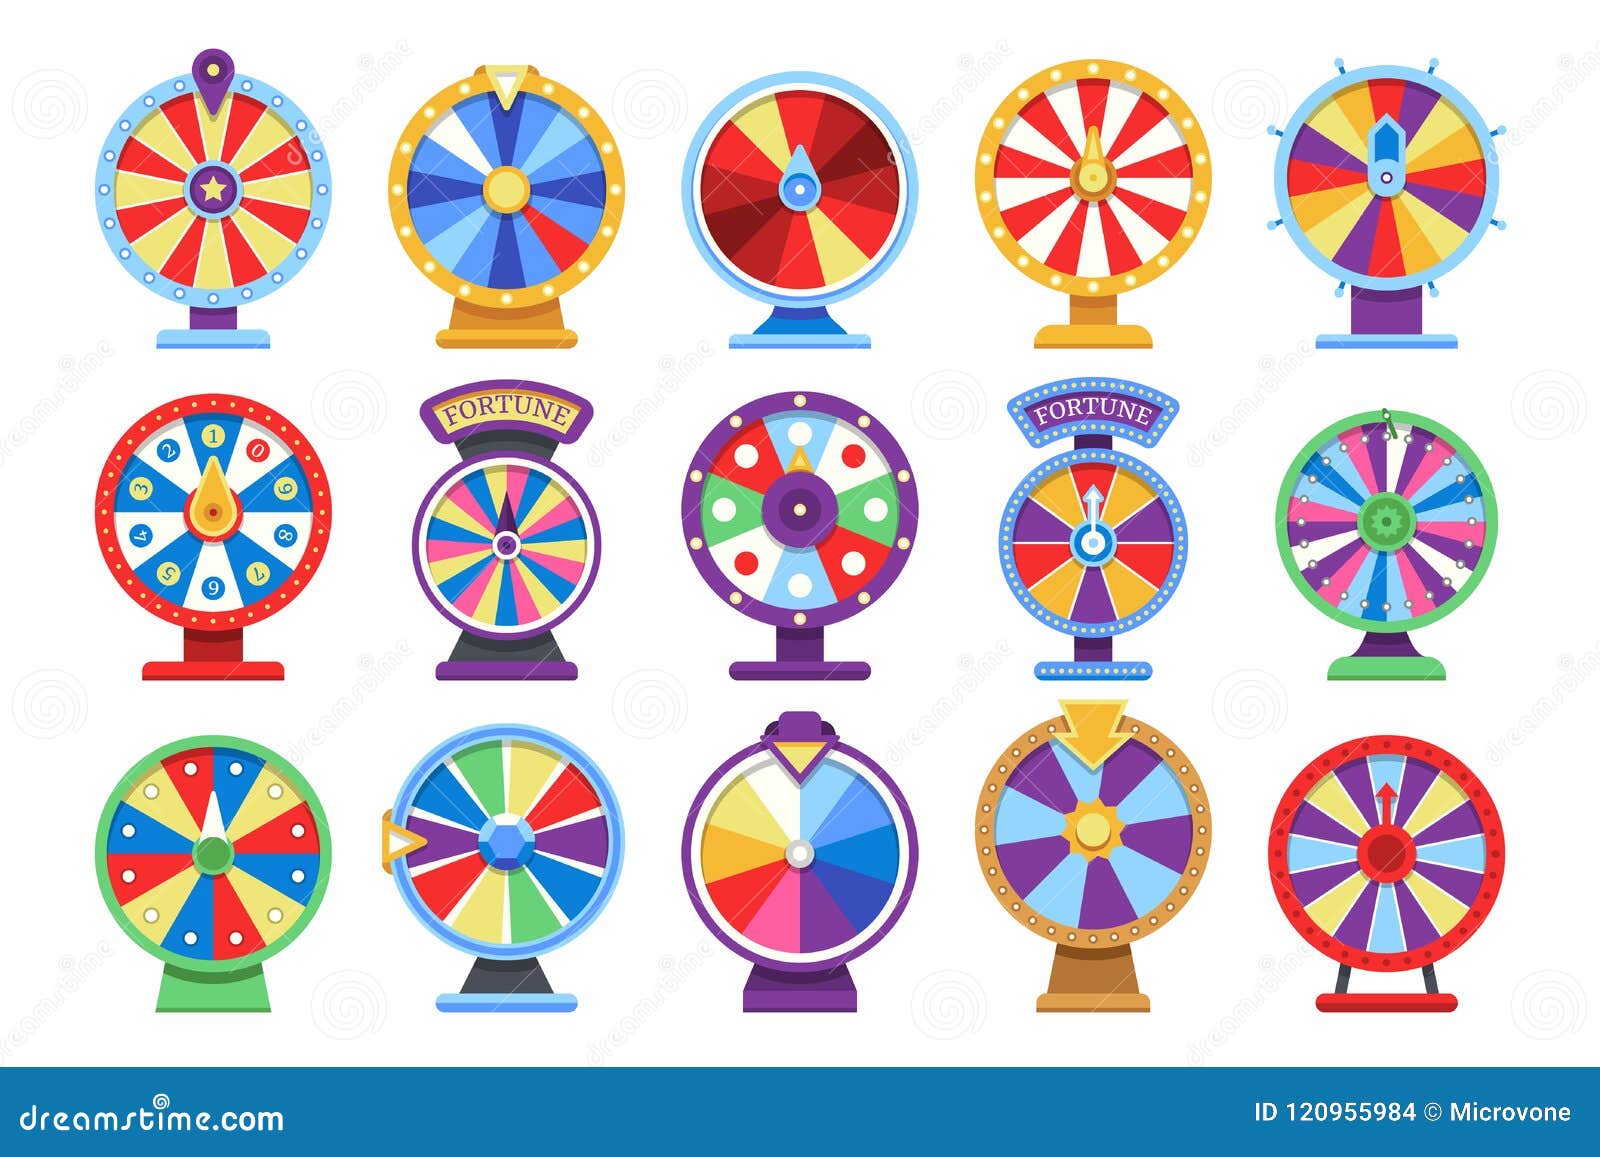 fortune wheels flat icons set. spin lucky wheel casino money game s